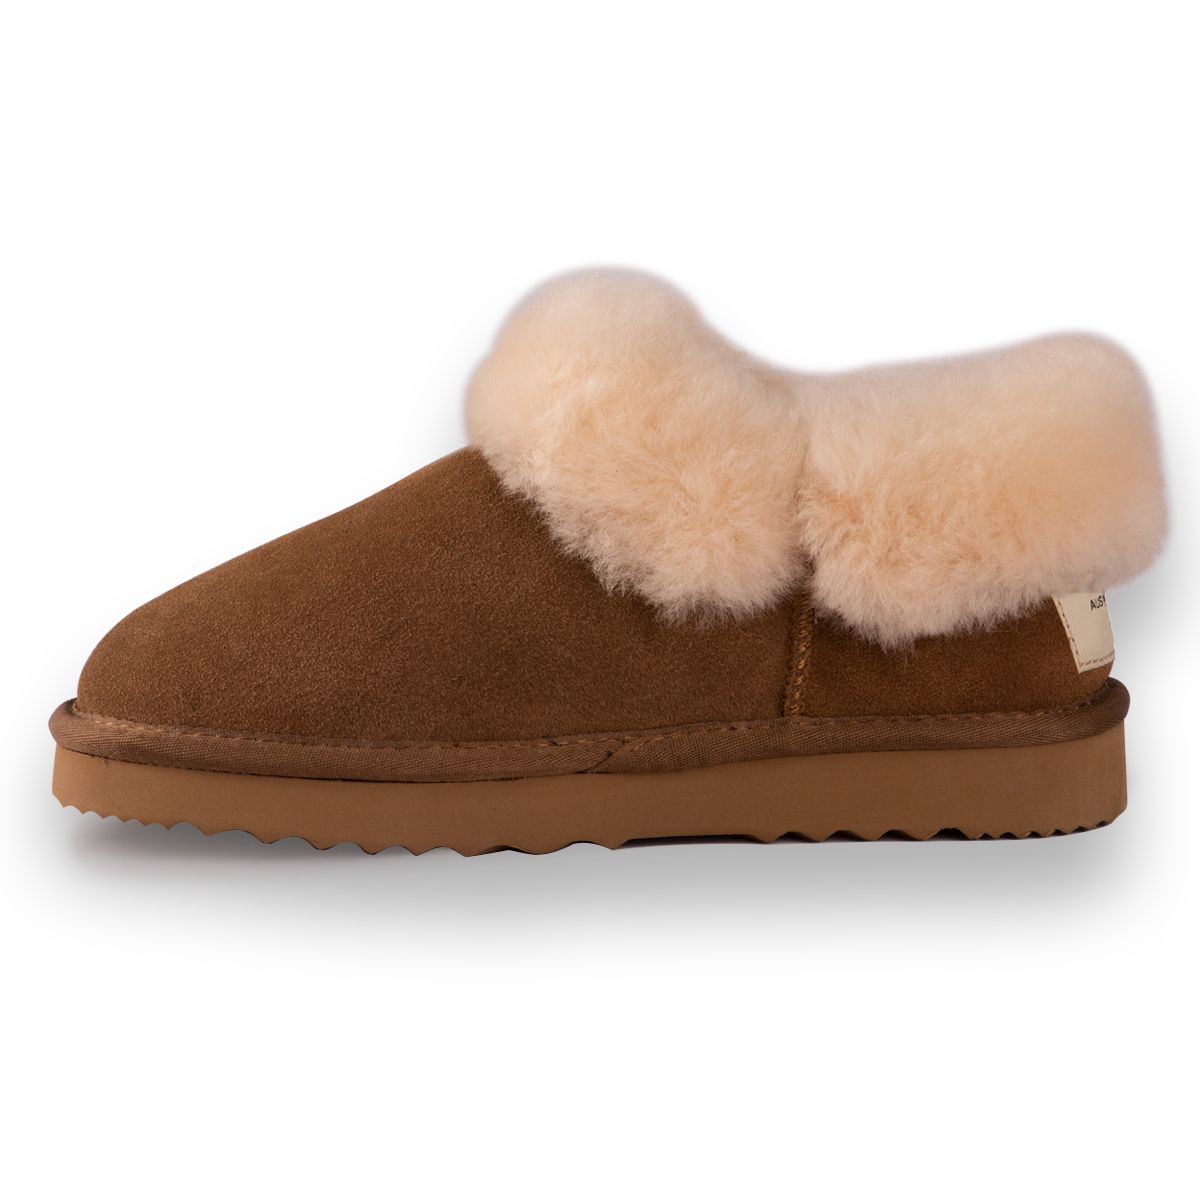 DETAILS    This traditional Ankle slipper for built comfort and support. The added sheepskin collar allows for that extra warmth, still providing a stylish look.  Traditional slipper you will wear all year round Plush premium Australian sheepskin lining Water resistant Leather Upper  Full Australian sheepskin insole Stylish looking sheepskin collar Light weight EVA, rubber blend outsole - soft and extra cushioning  Sheepskin breathes allowing feet to stay warm in winter and cool in summer 100% brand new and high quality, comes in a branded box, suitable for gift